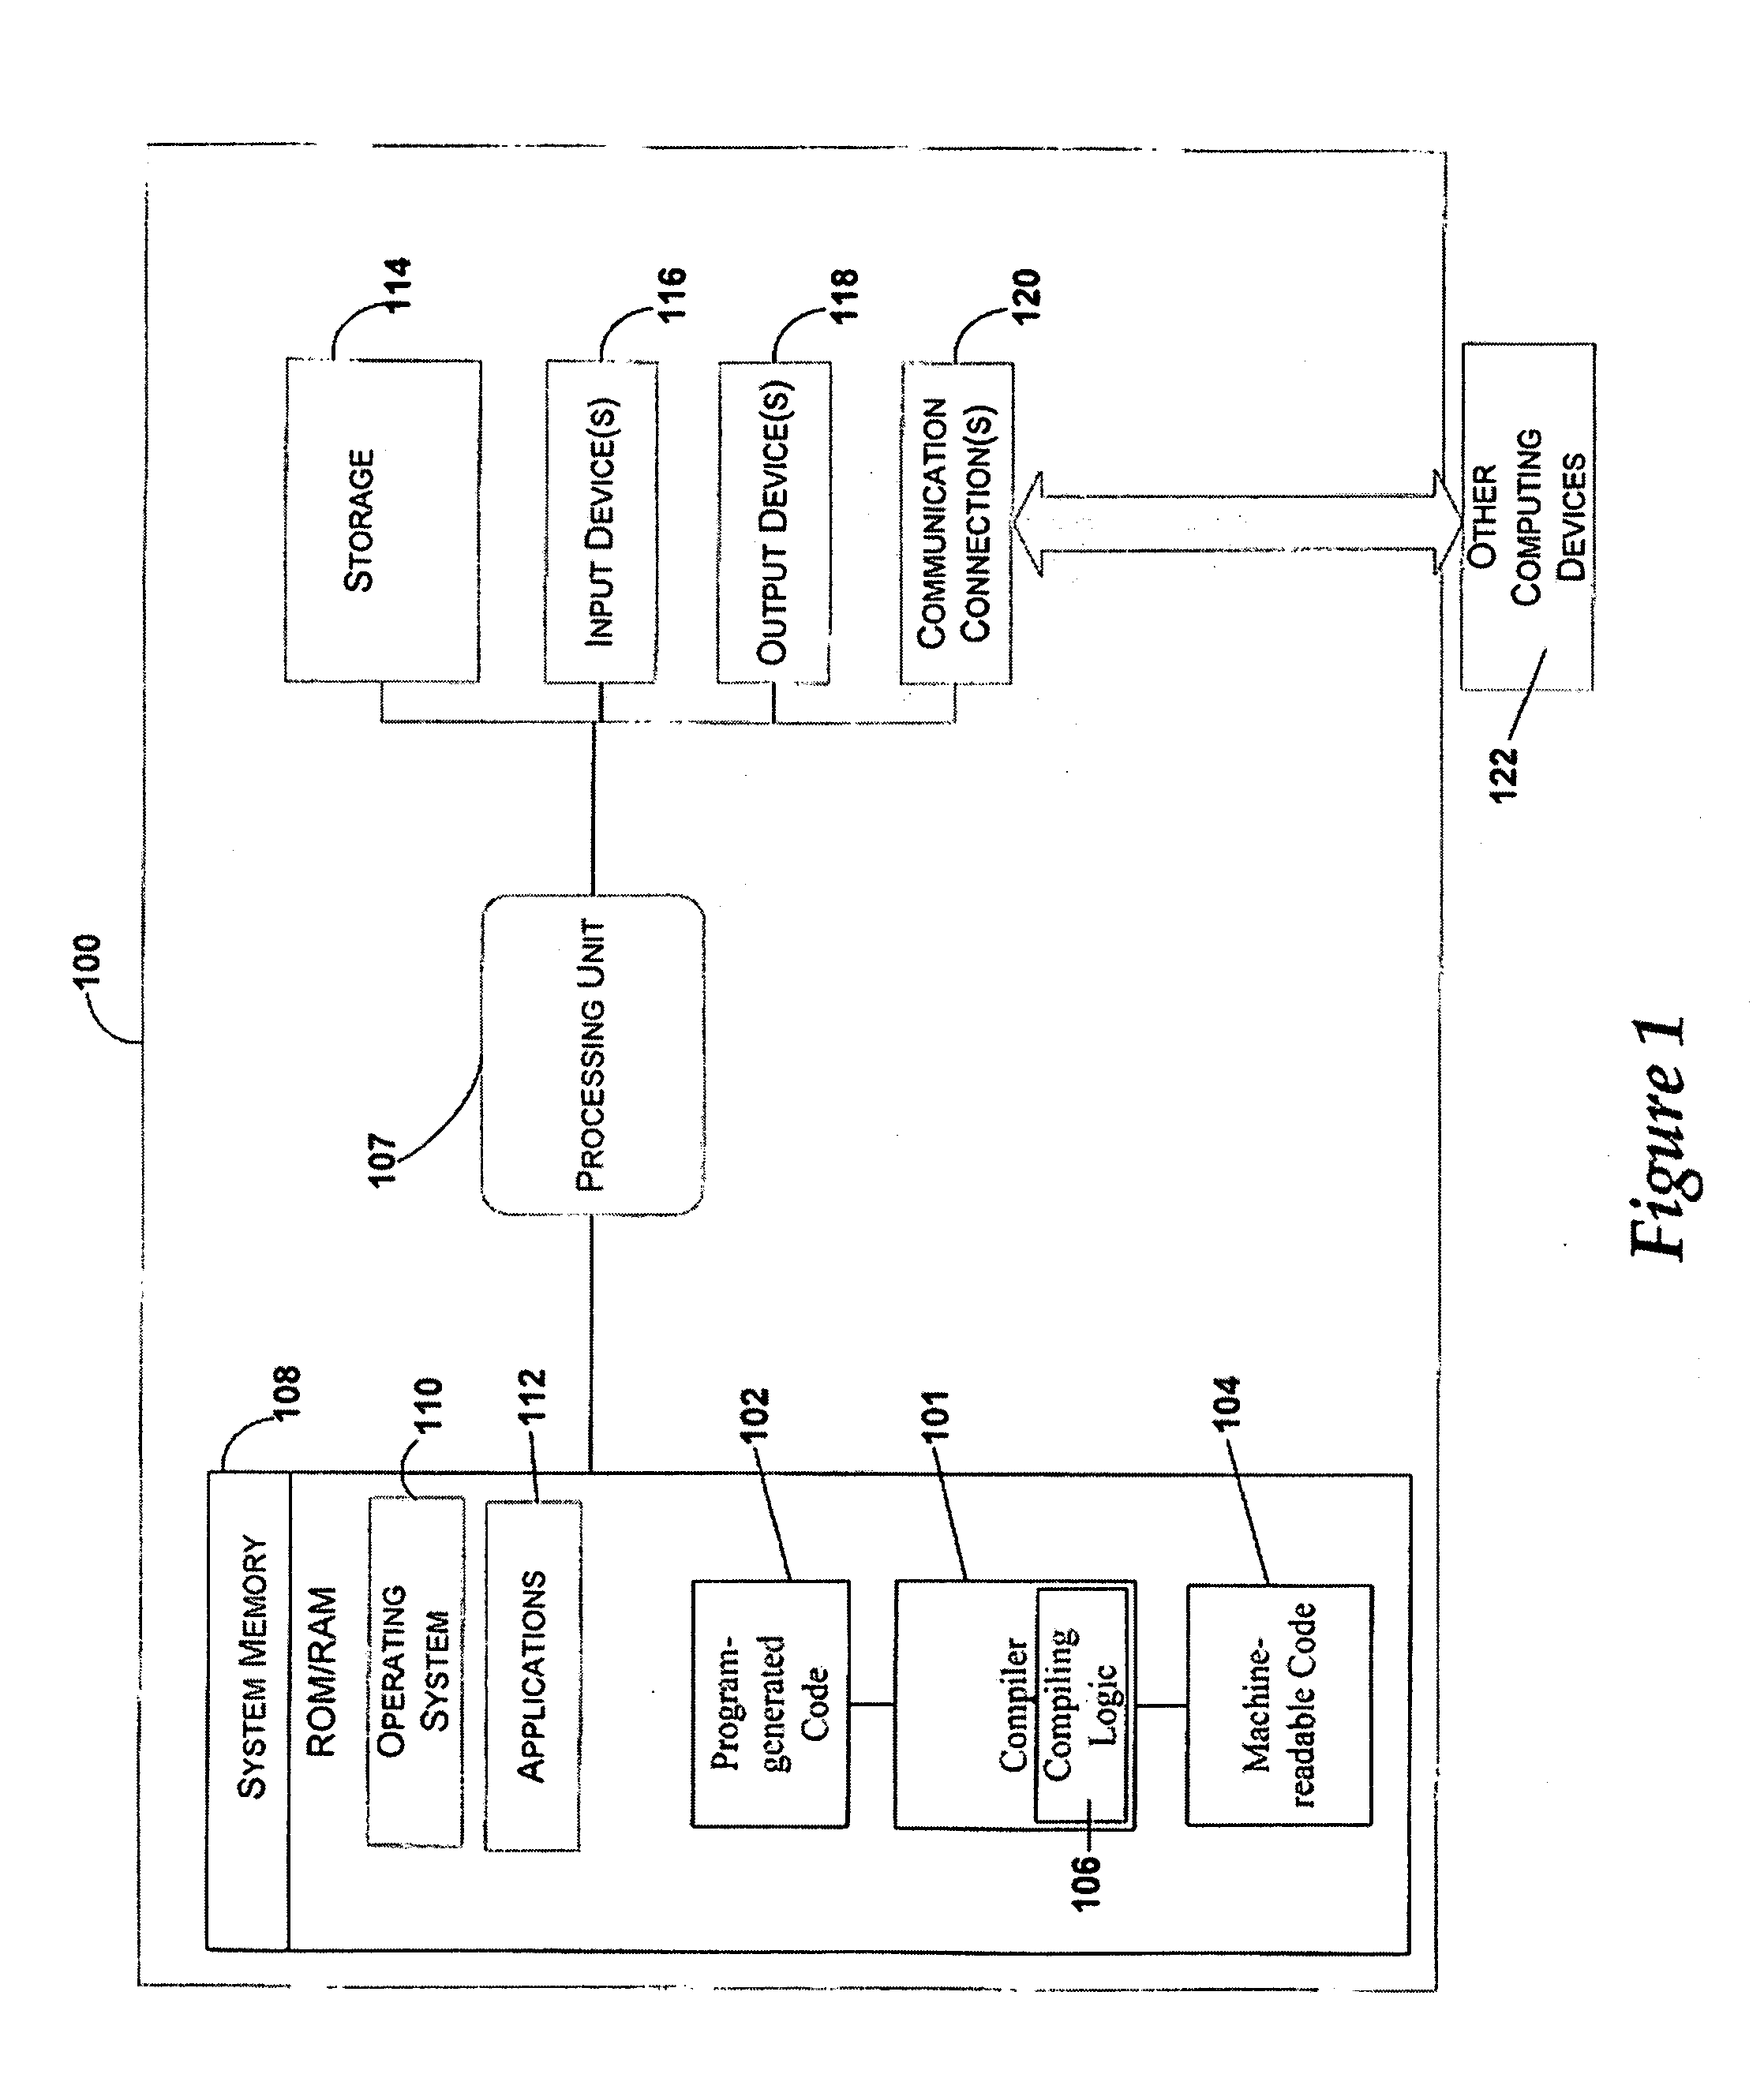 Method and system for efficient range and stride checking